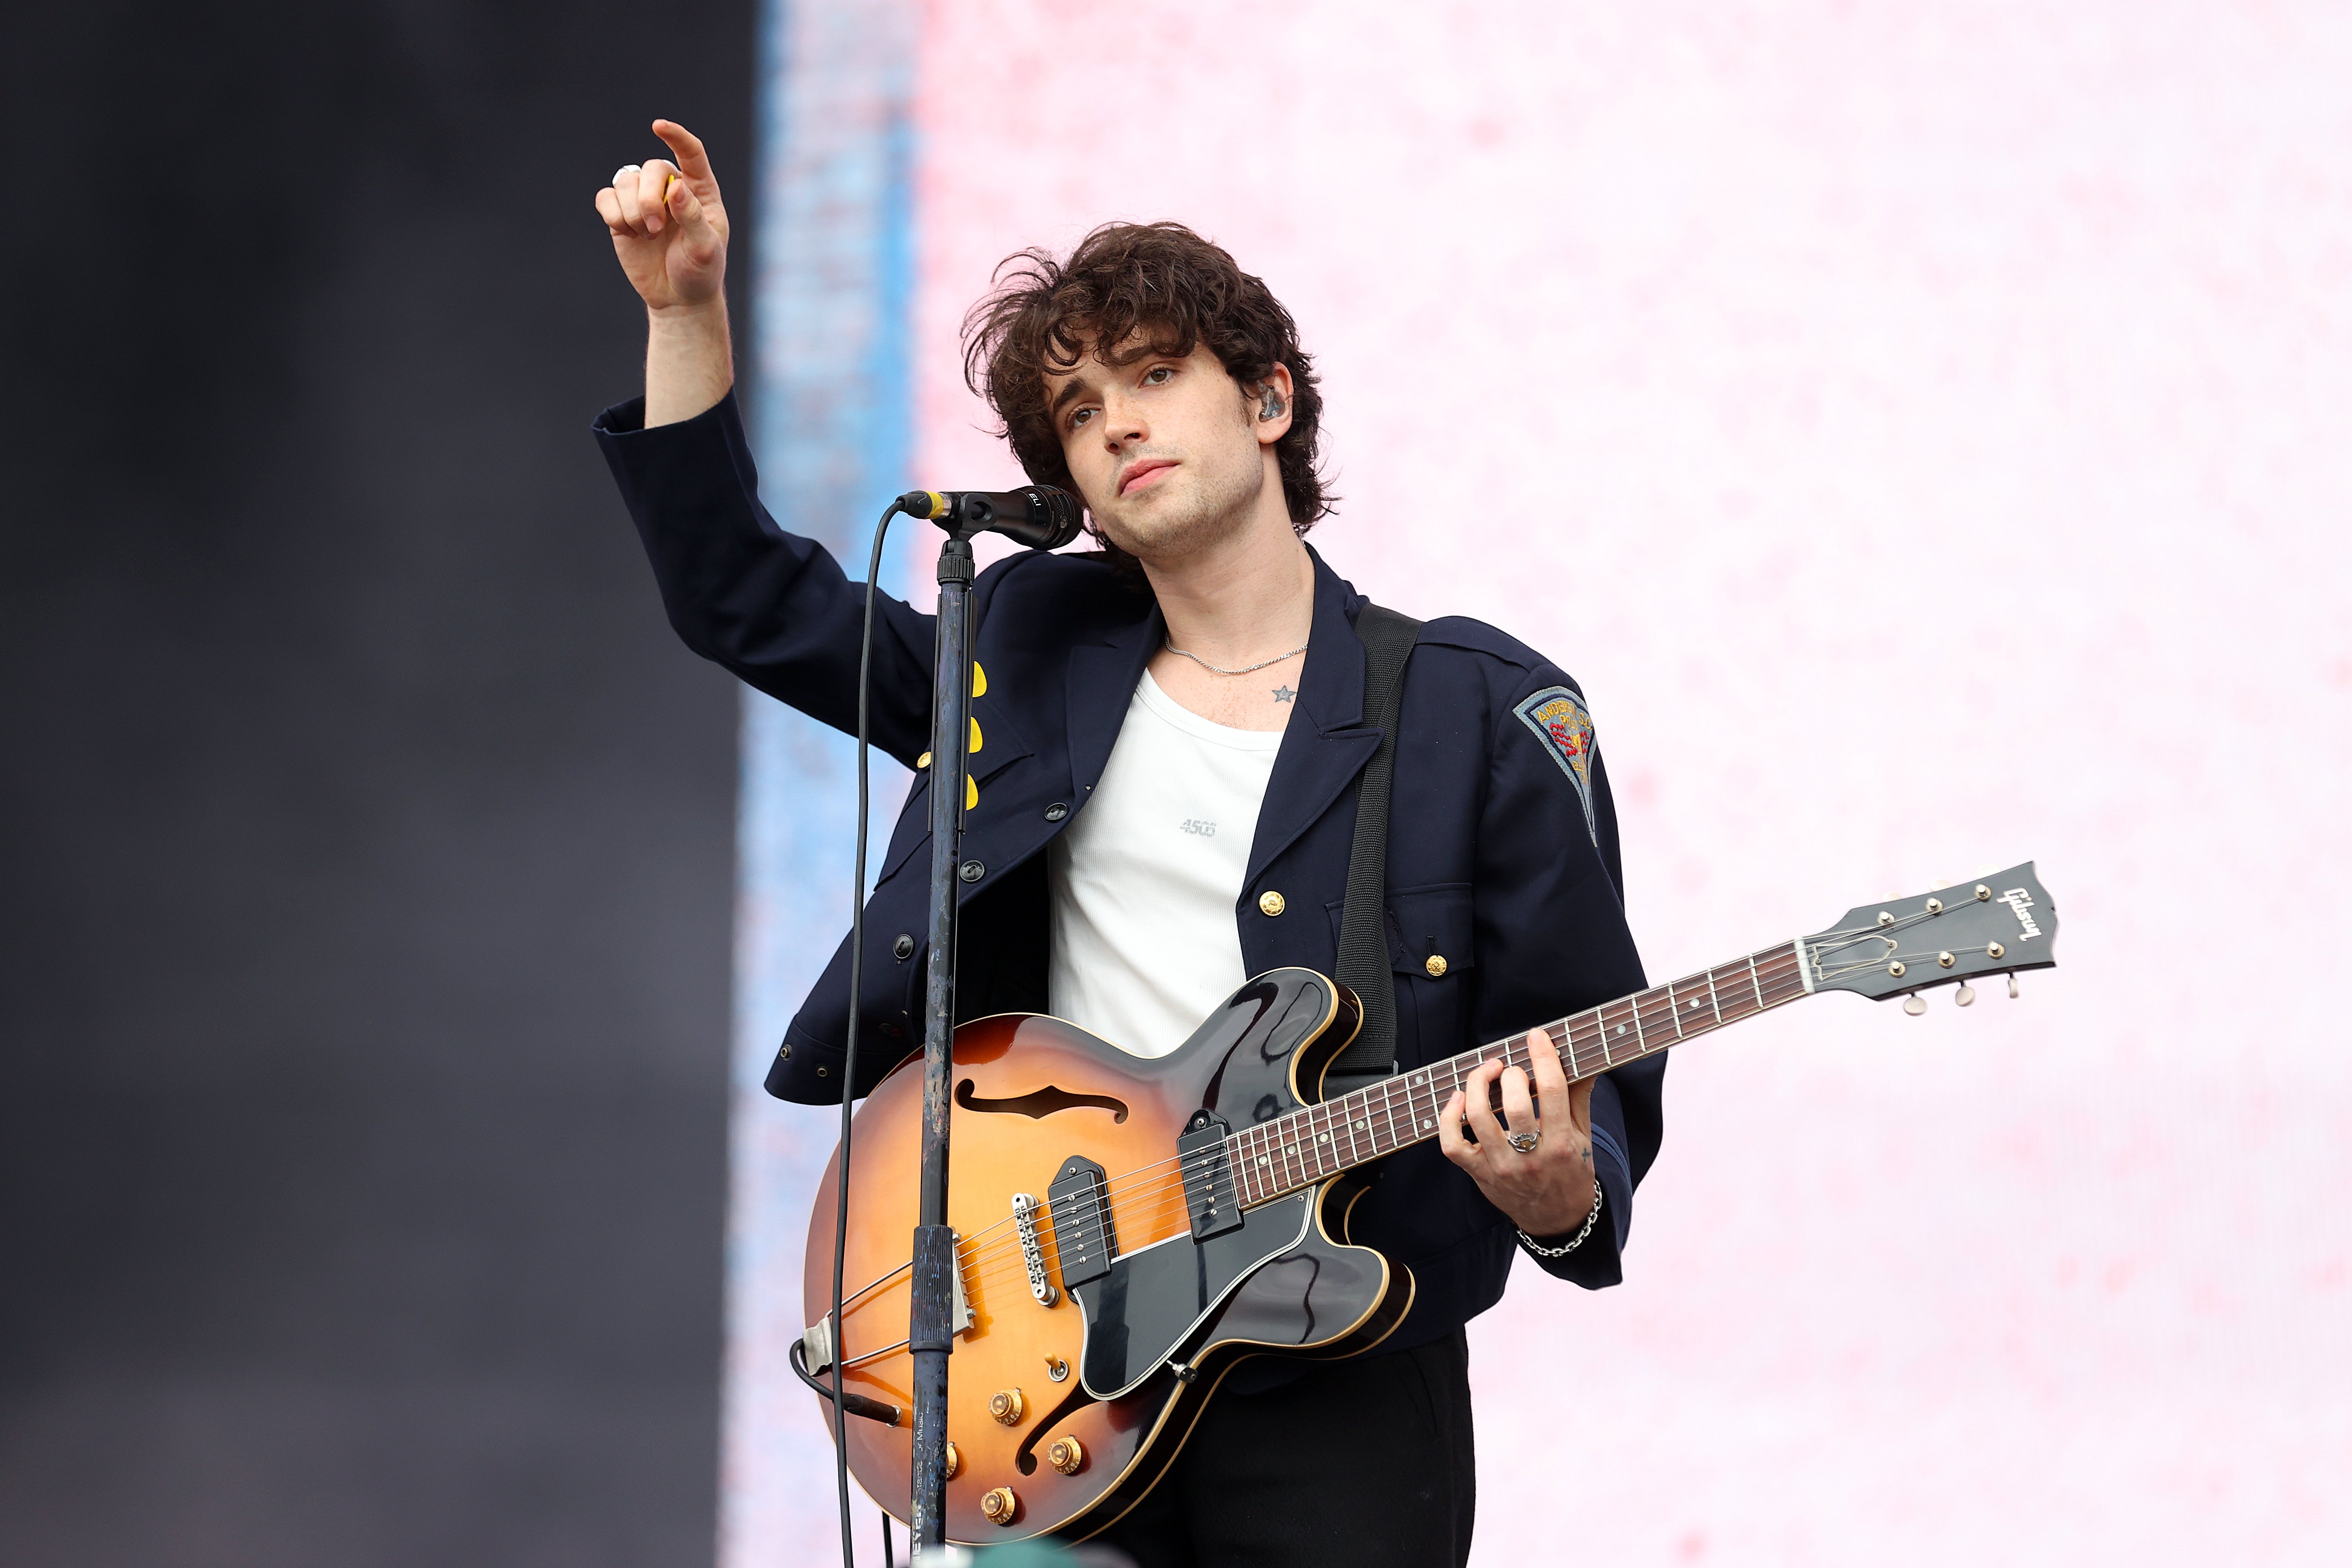 Elijah Hewson performing on stage for the "Inhaler" at the Reading Festival on August 27, 2021, in Reading, England | Source: Getty Images